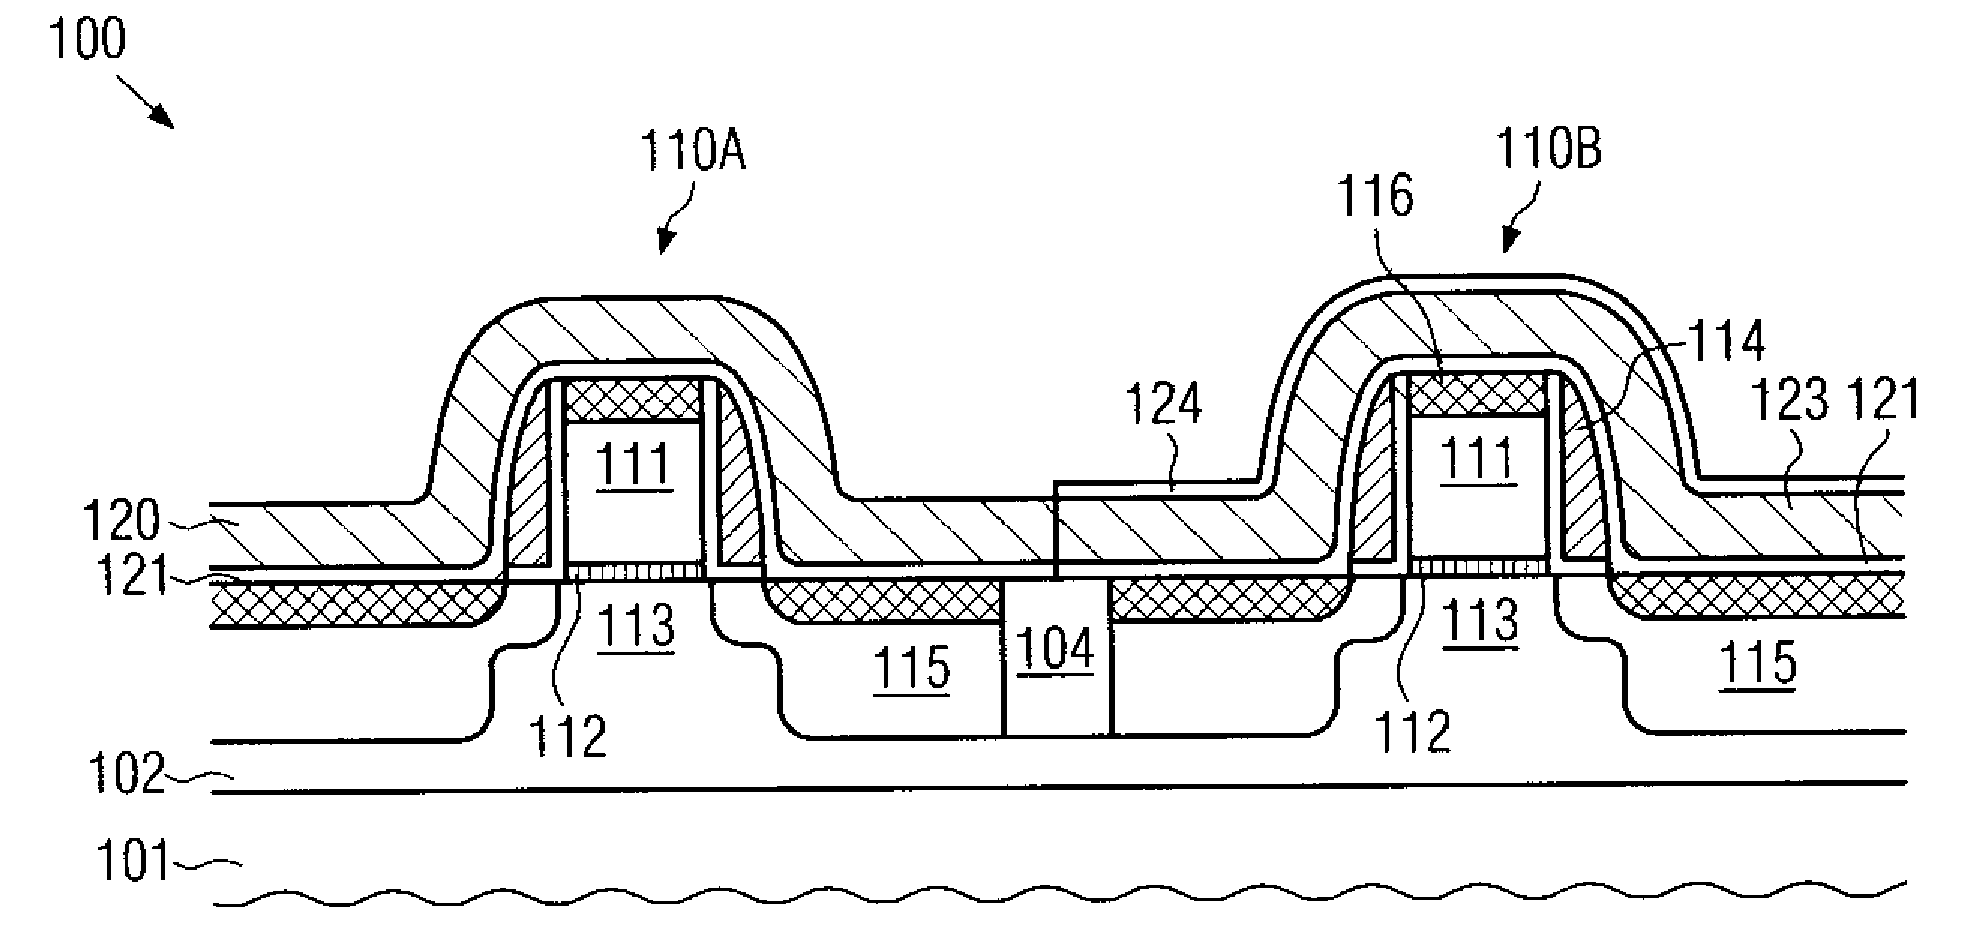 Method for reducing resist poisoning during patterning of stressed nitrogen-containing layers in a semiconductor device